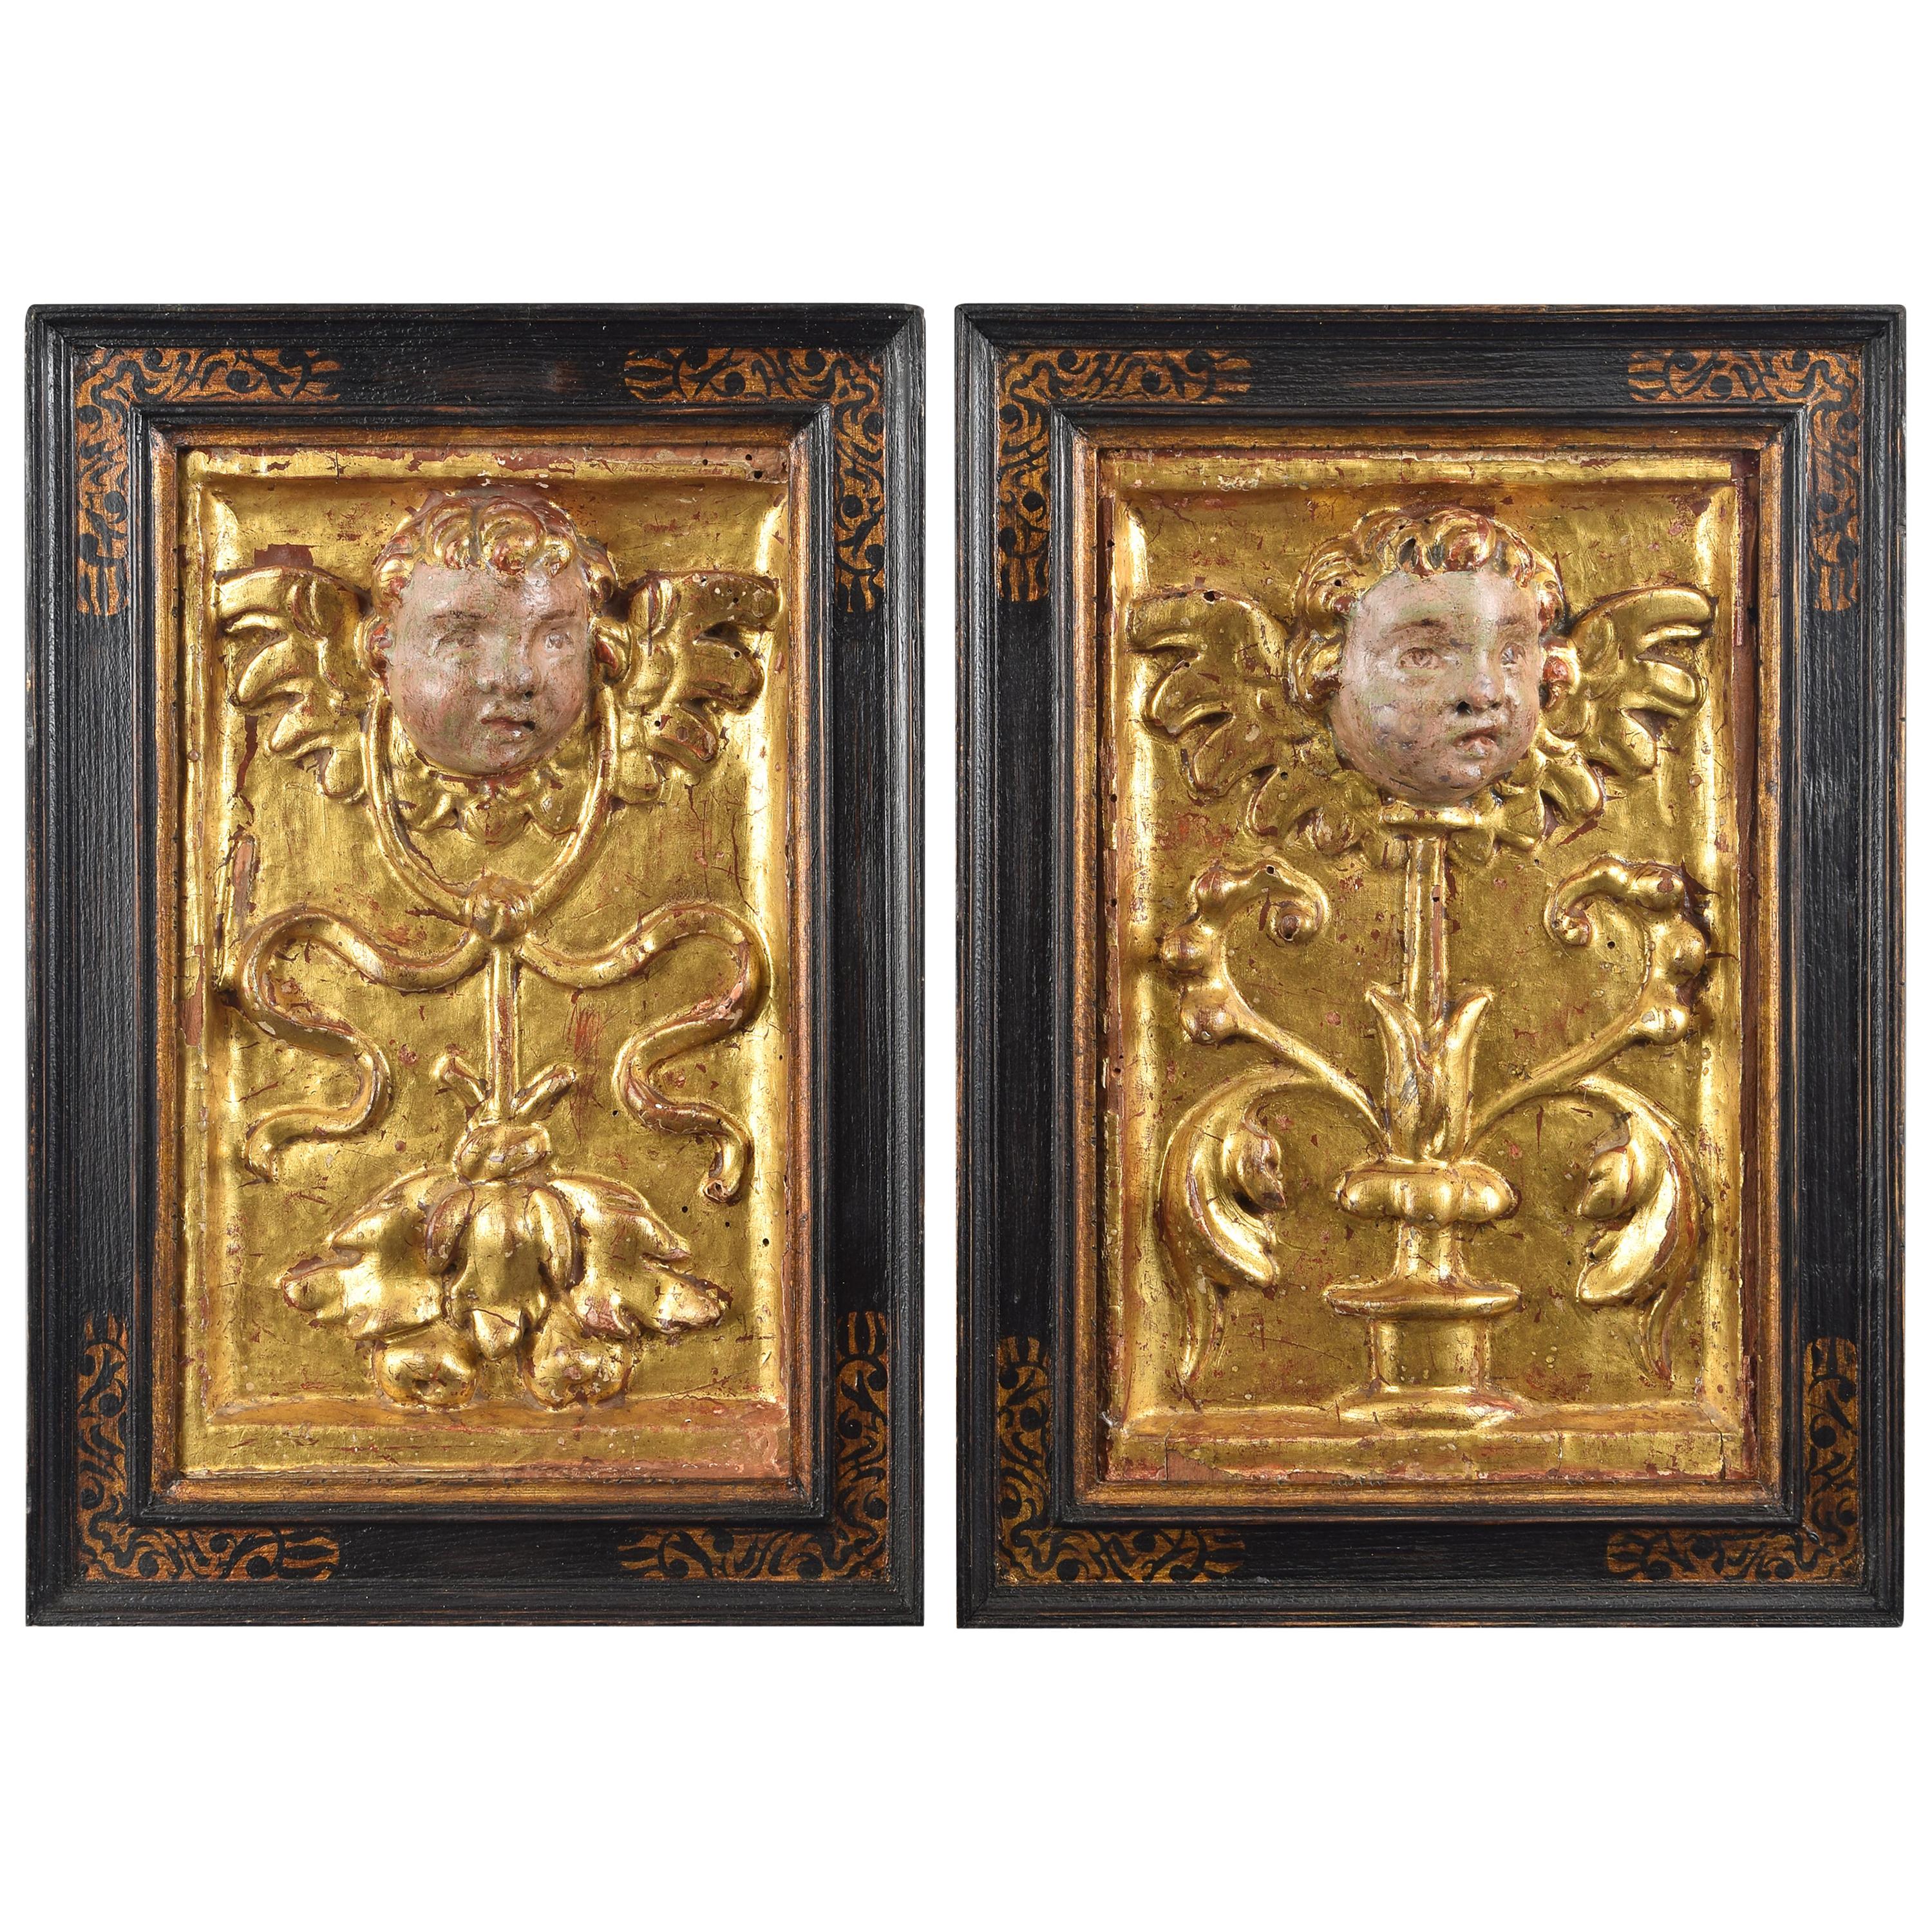 Pair of Reliefs, Grotesque or Candelieri, Wood, 16th Century